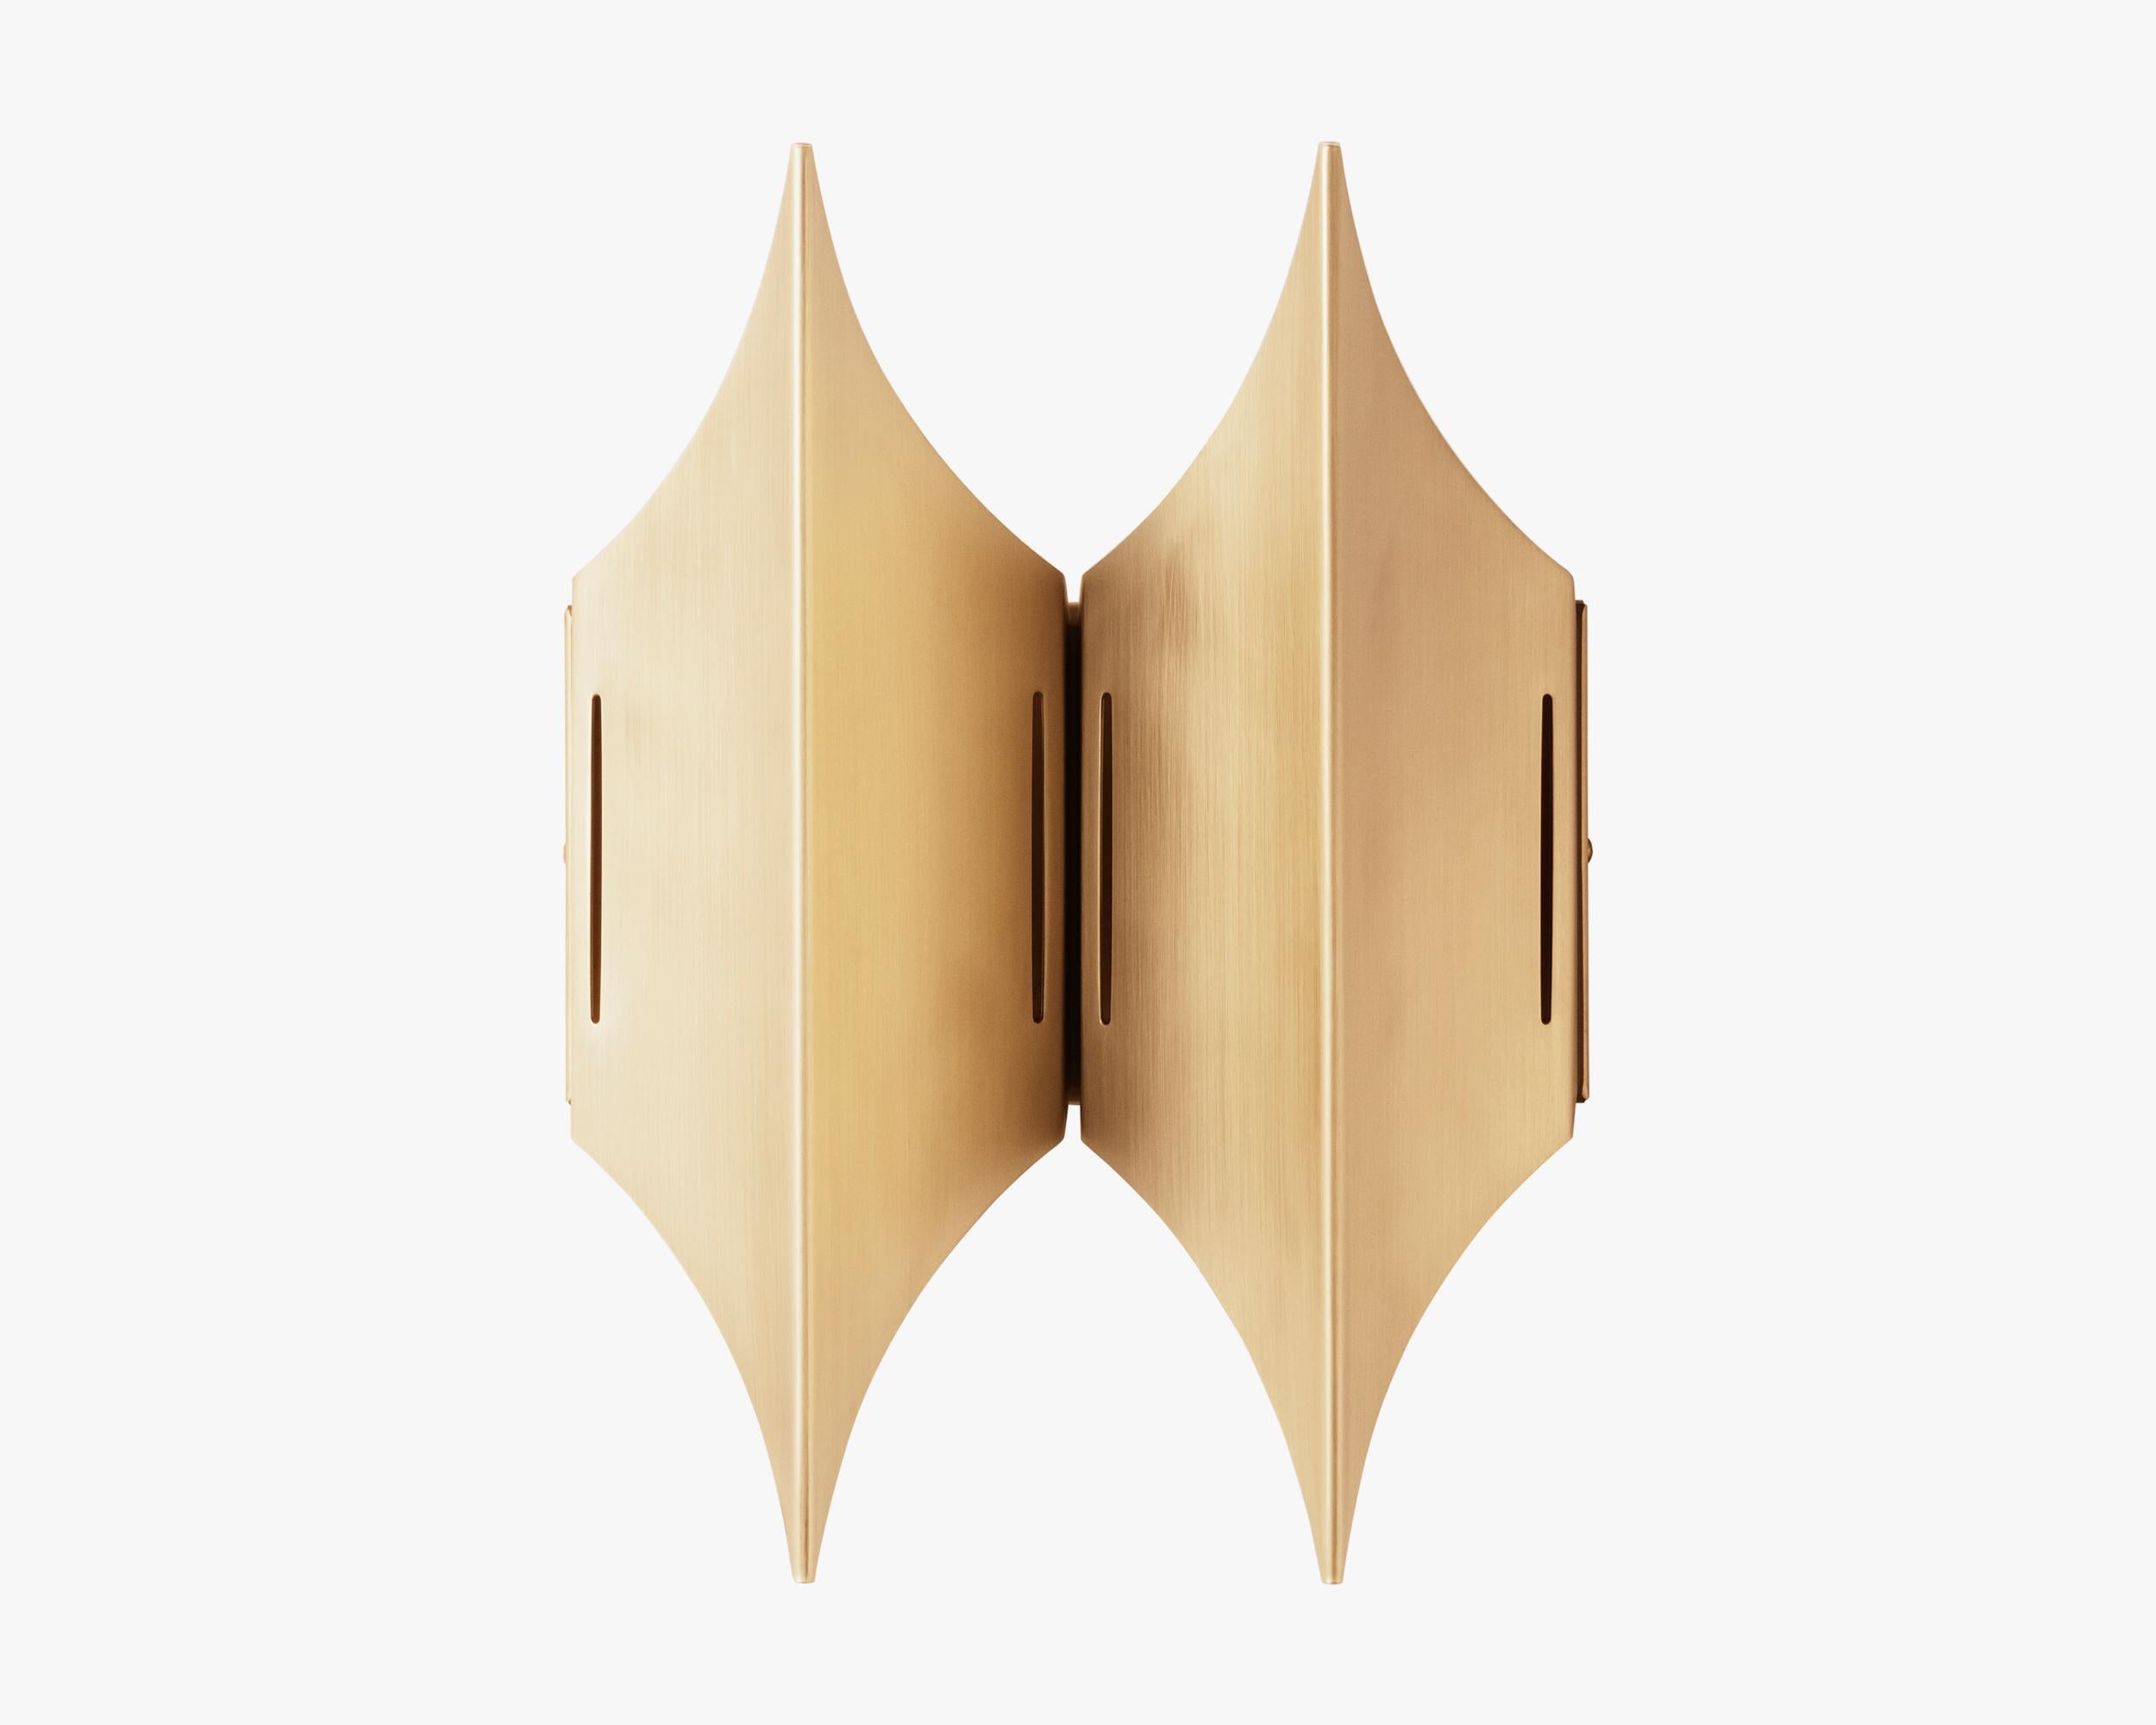 WALL LAMP GOTHIC II BY LYFA
Wall lamp Gothic II signed by Bent Karlby for LYFA

Brushed brass
L.206 mm H.280 mm
Bulbs: 2 x G9 max 28W (110V-230V)

--
GOTHIC I is a distinctive wall lamp full of character designed in 1970 by Bent Karlby. The